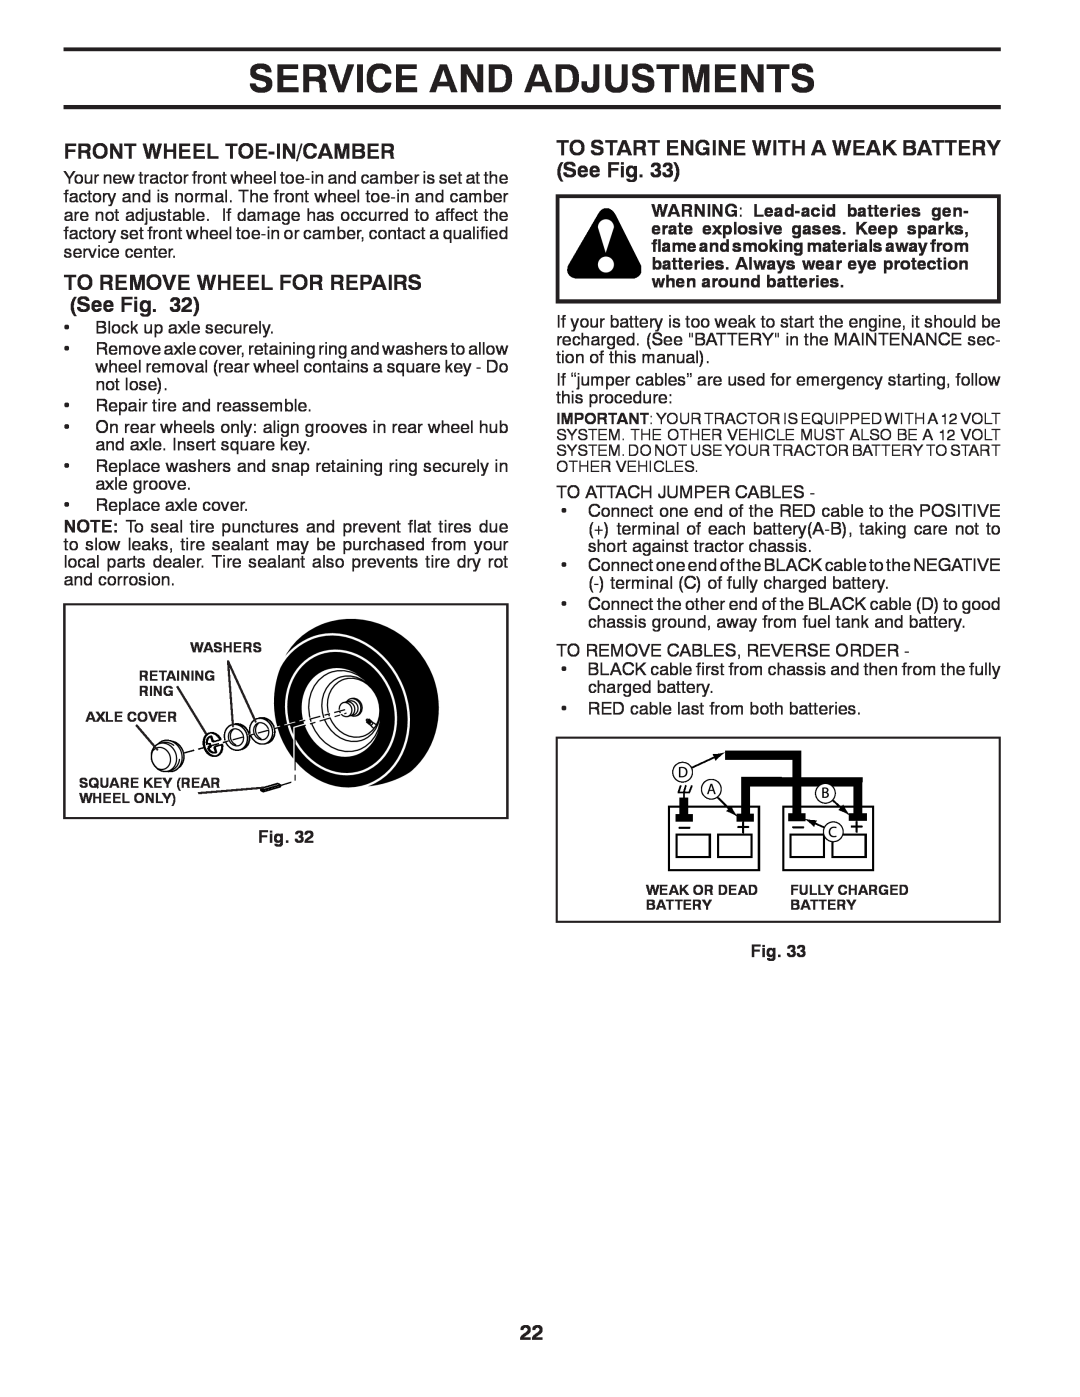 Husqvarna 96045001800 owner manual Front Wheel Toe-In/Camber, TO REMOVE WHEEL FOR REPAIRS See Fig, Service And Adjustments 